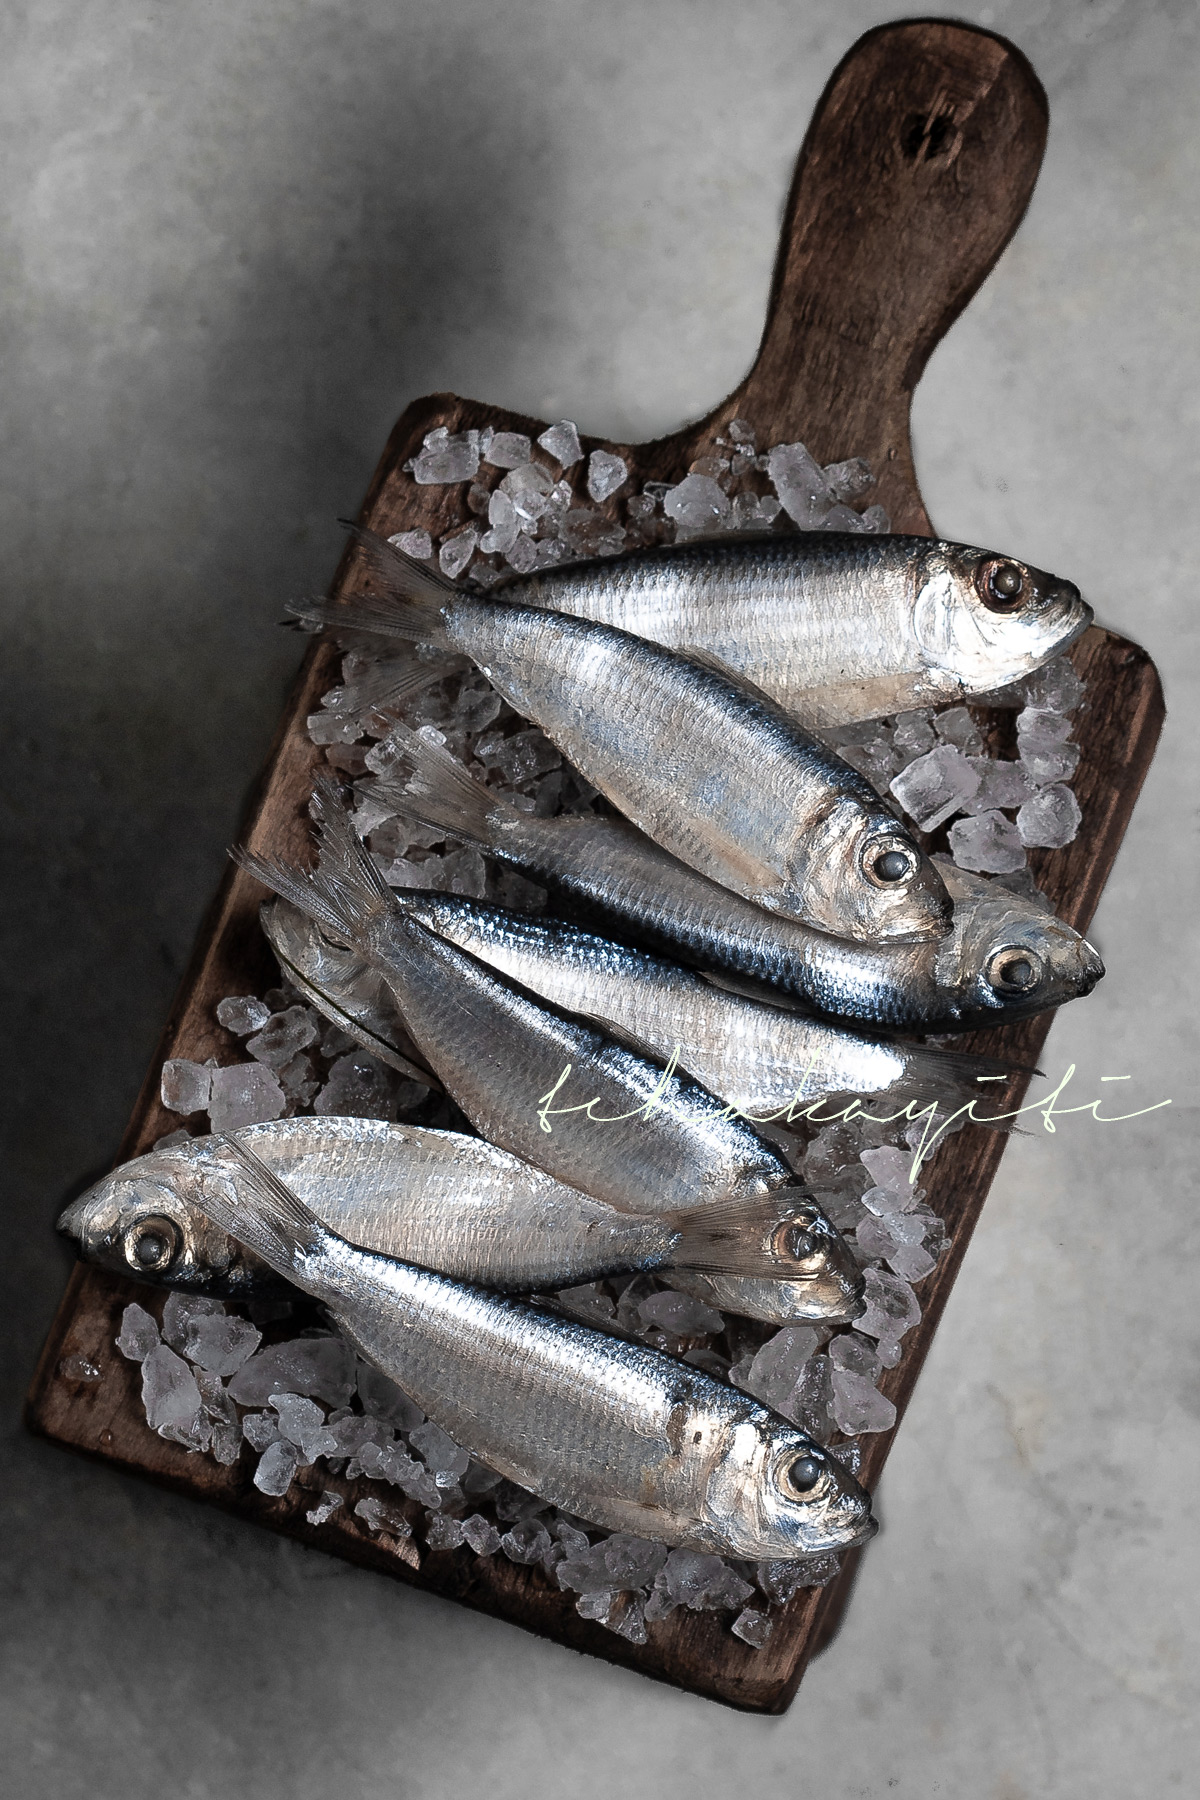 Raw fresh sardines awaiting to be grilled for a Haitian style meal | Tchakayiti.com